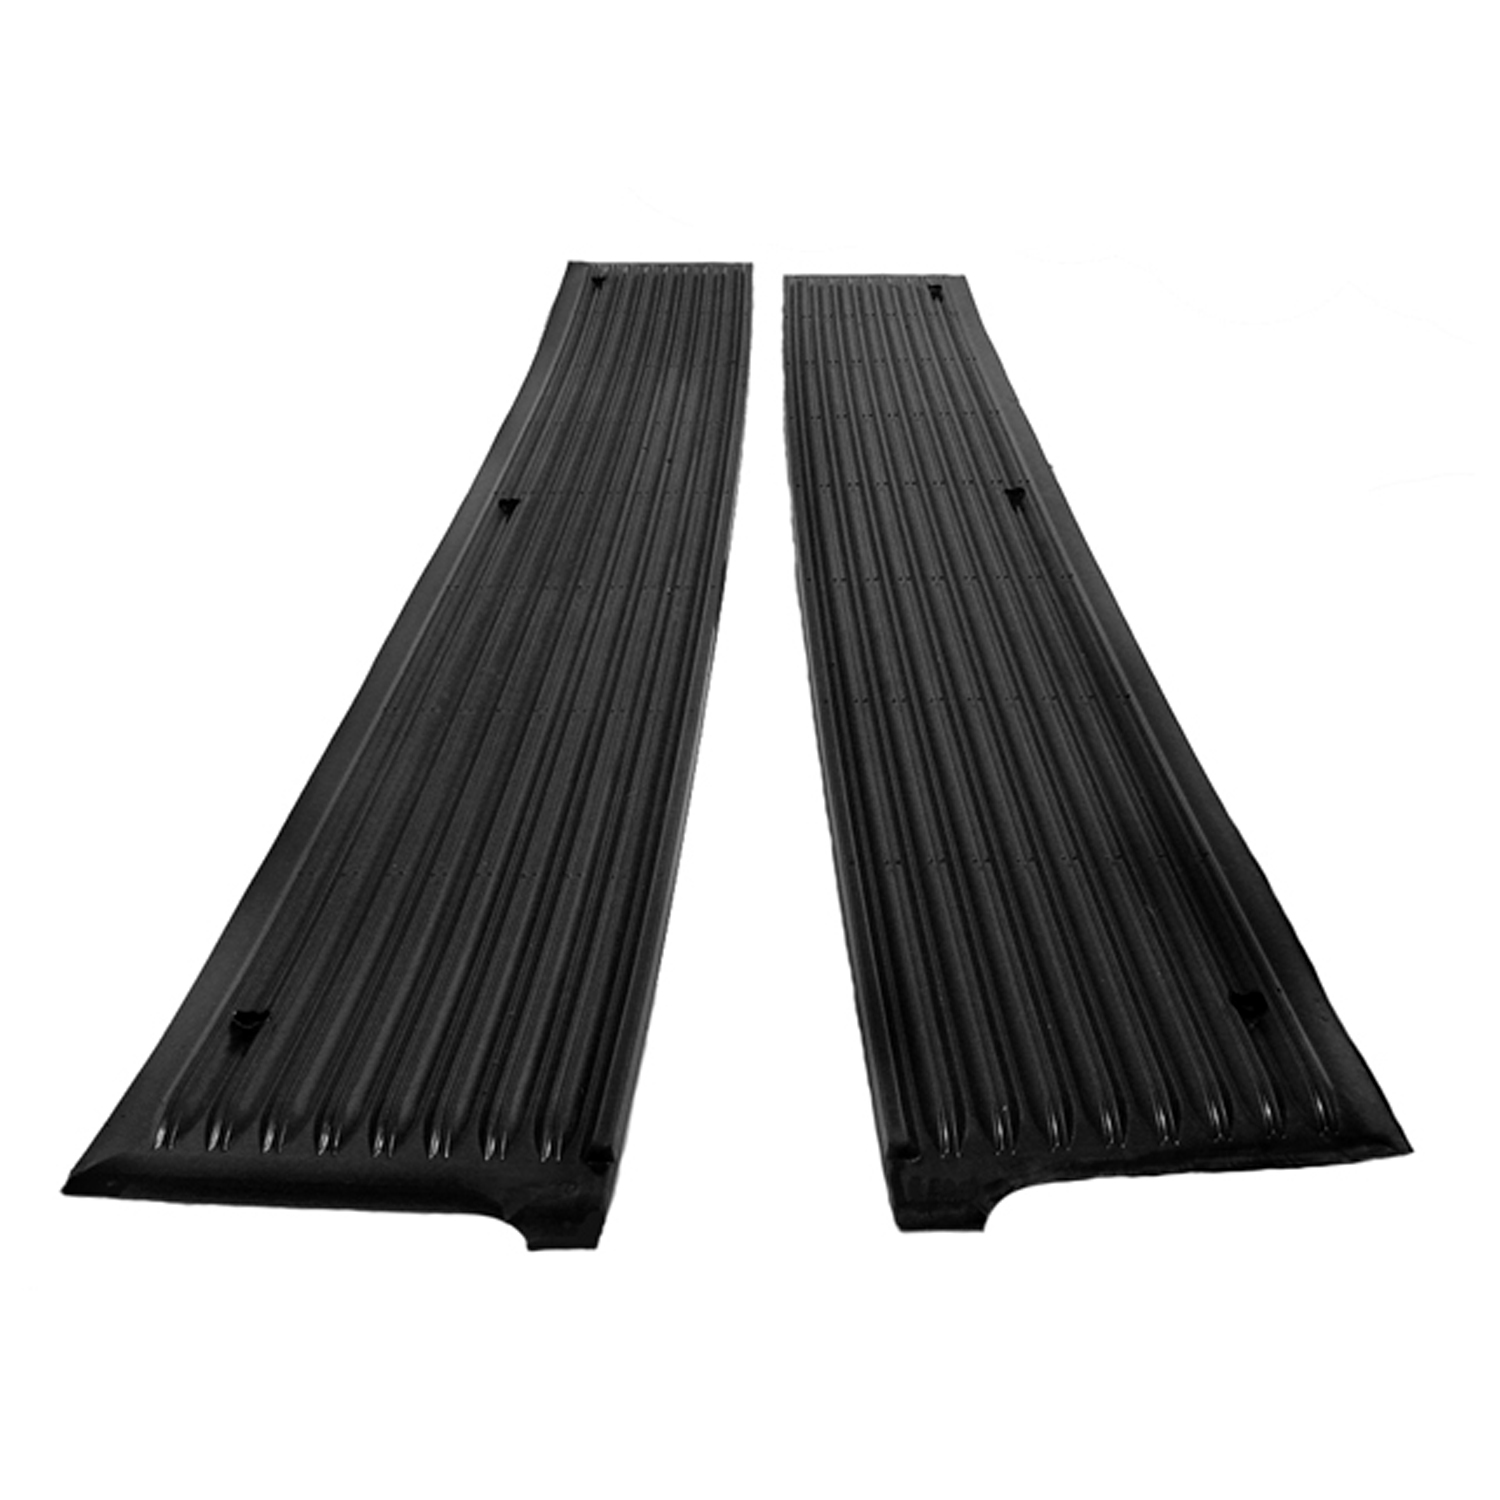 1947 Chevrolet Stylemaster Series Inside running board covers (step-plate pads)-RB 1903